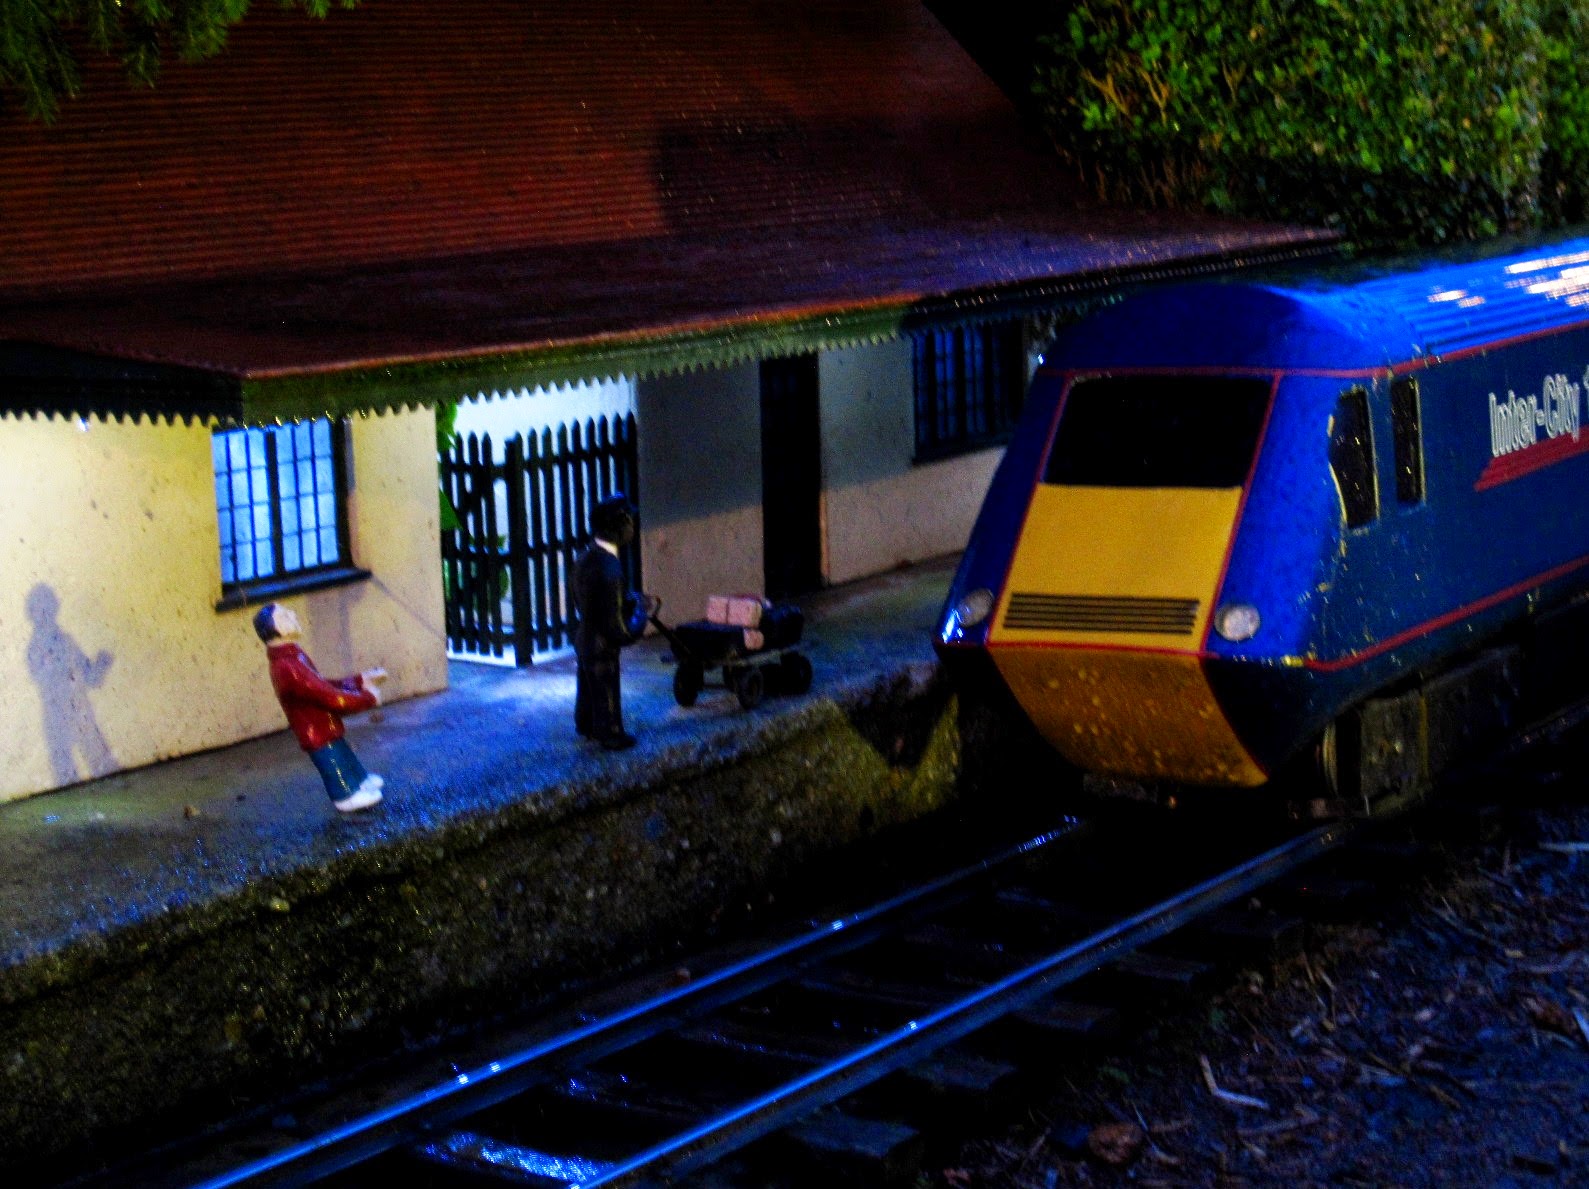 Miniature model of a railways station with a train at the station, at night.